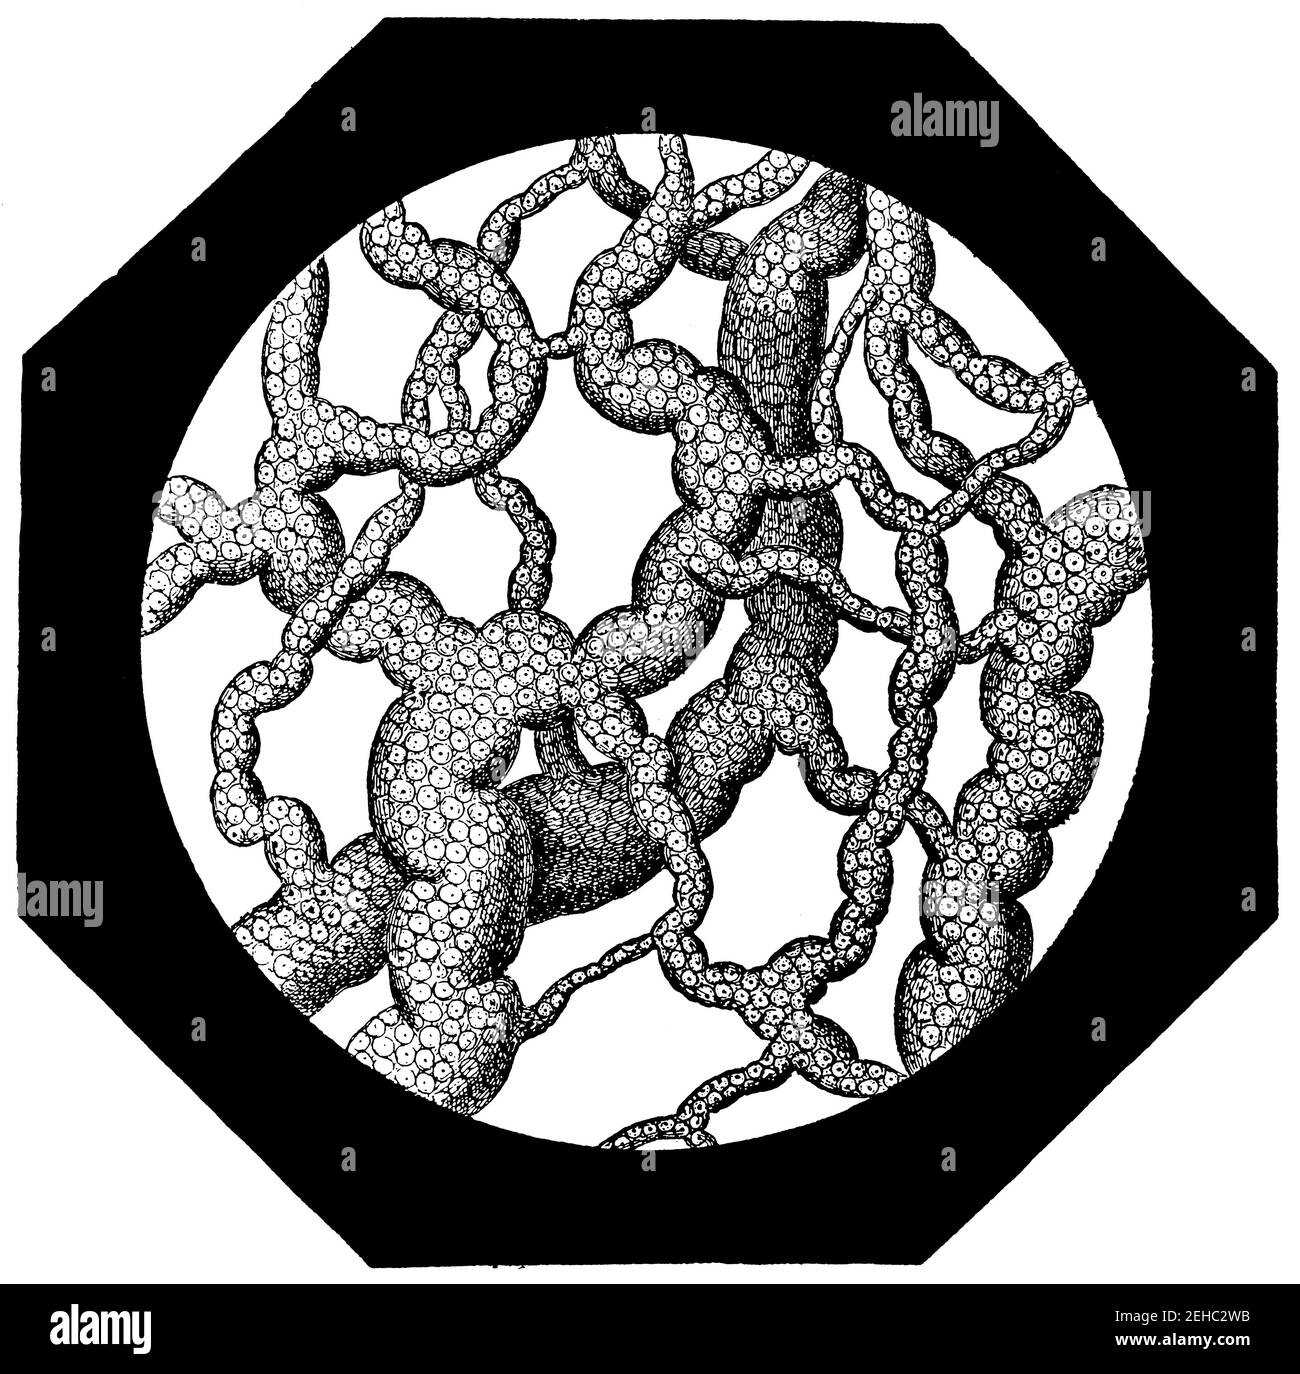 Lymph capillaries viewed through the microscope. Illustration of the 19th century. Germany. White background. Stock Photo